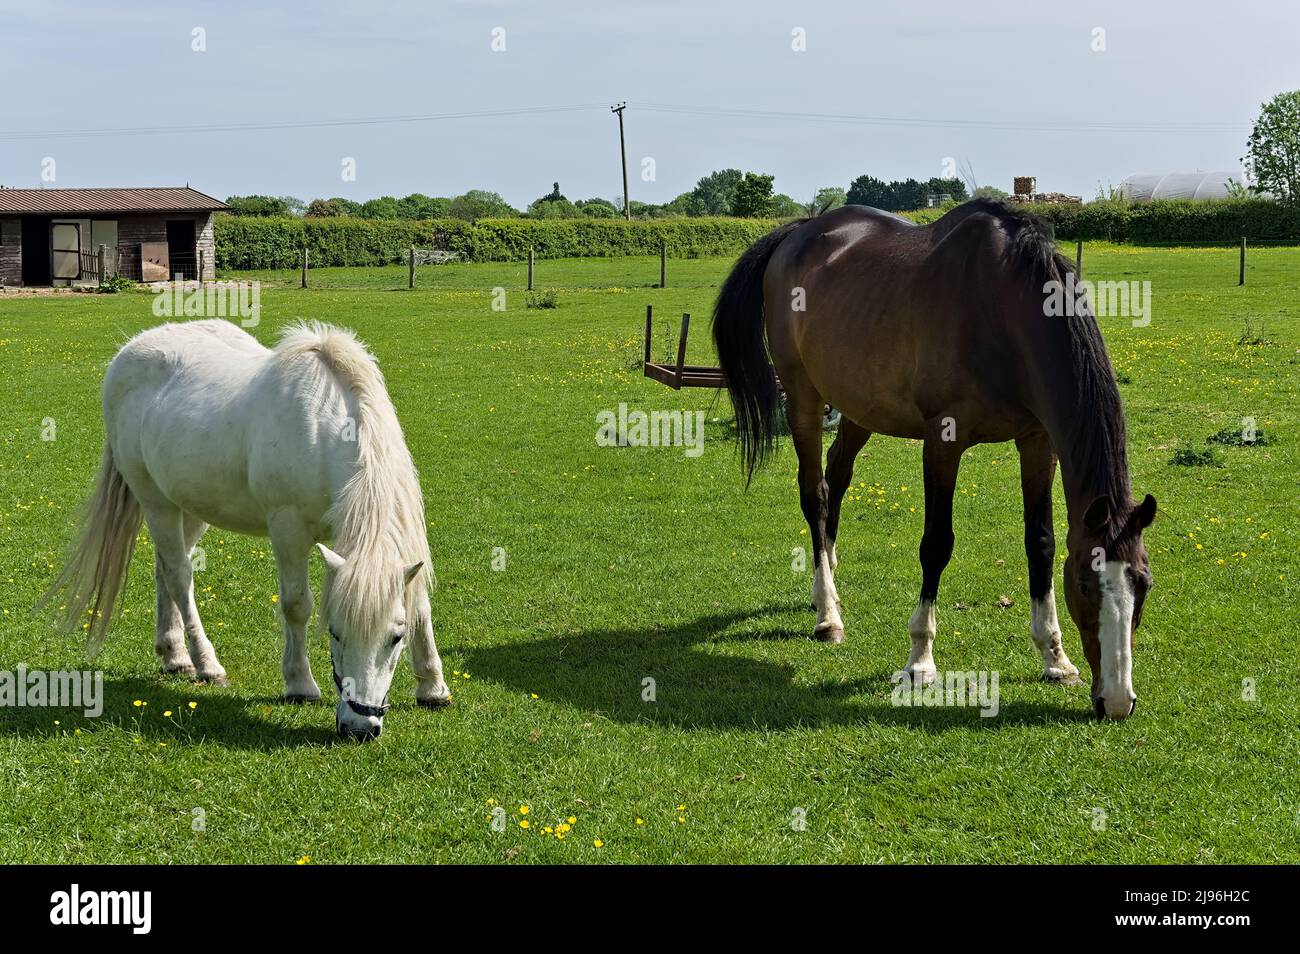 Two horses grazing in a paddock fieldl during springtime Stock Photo